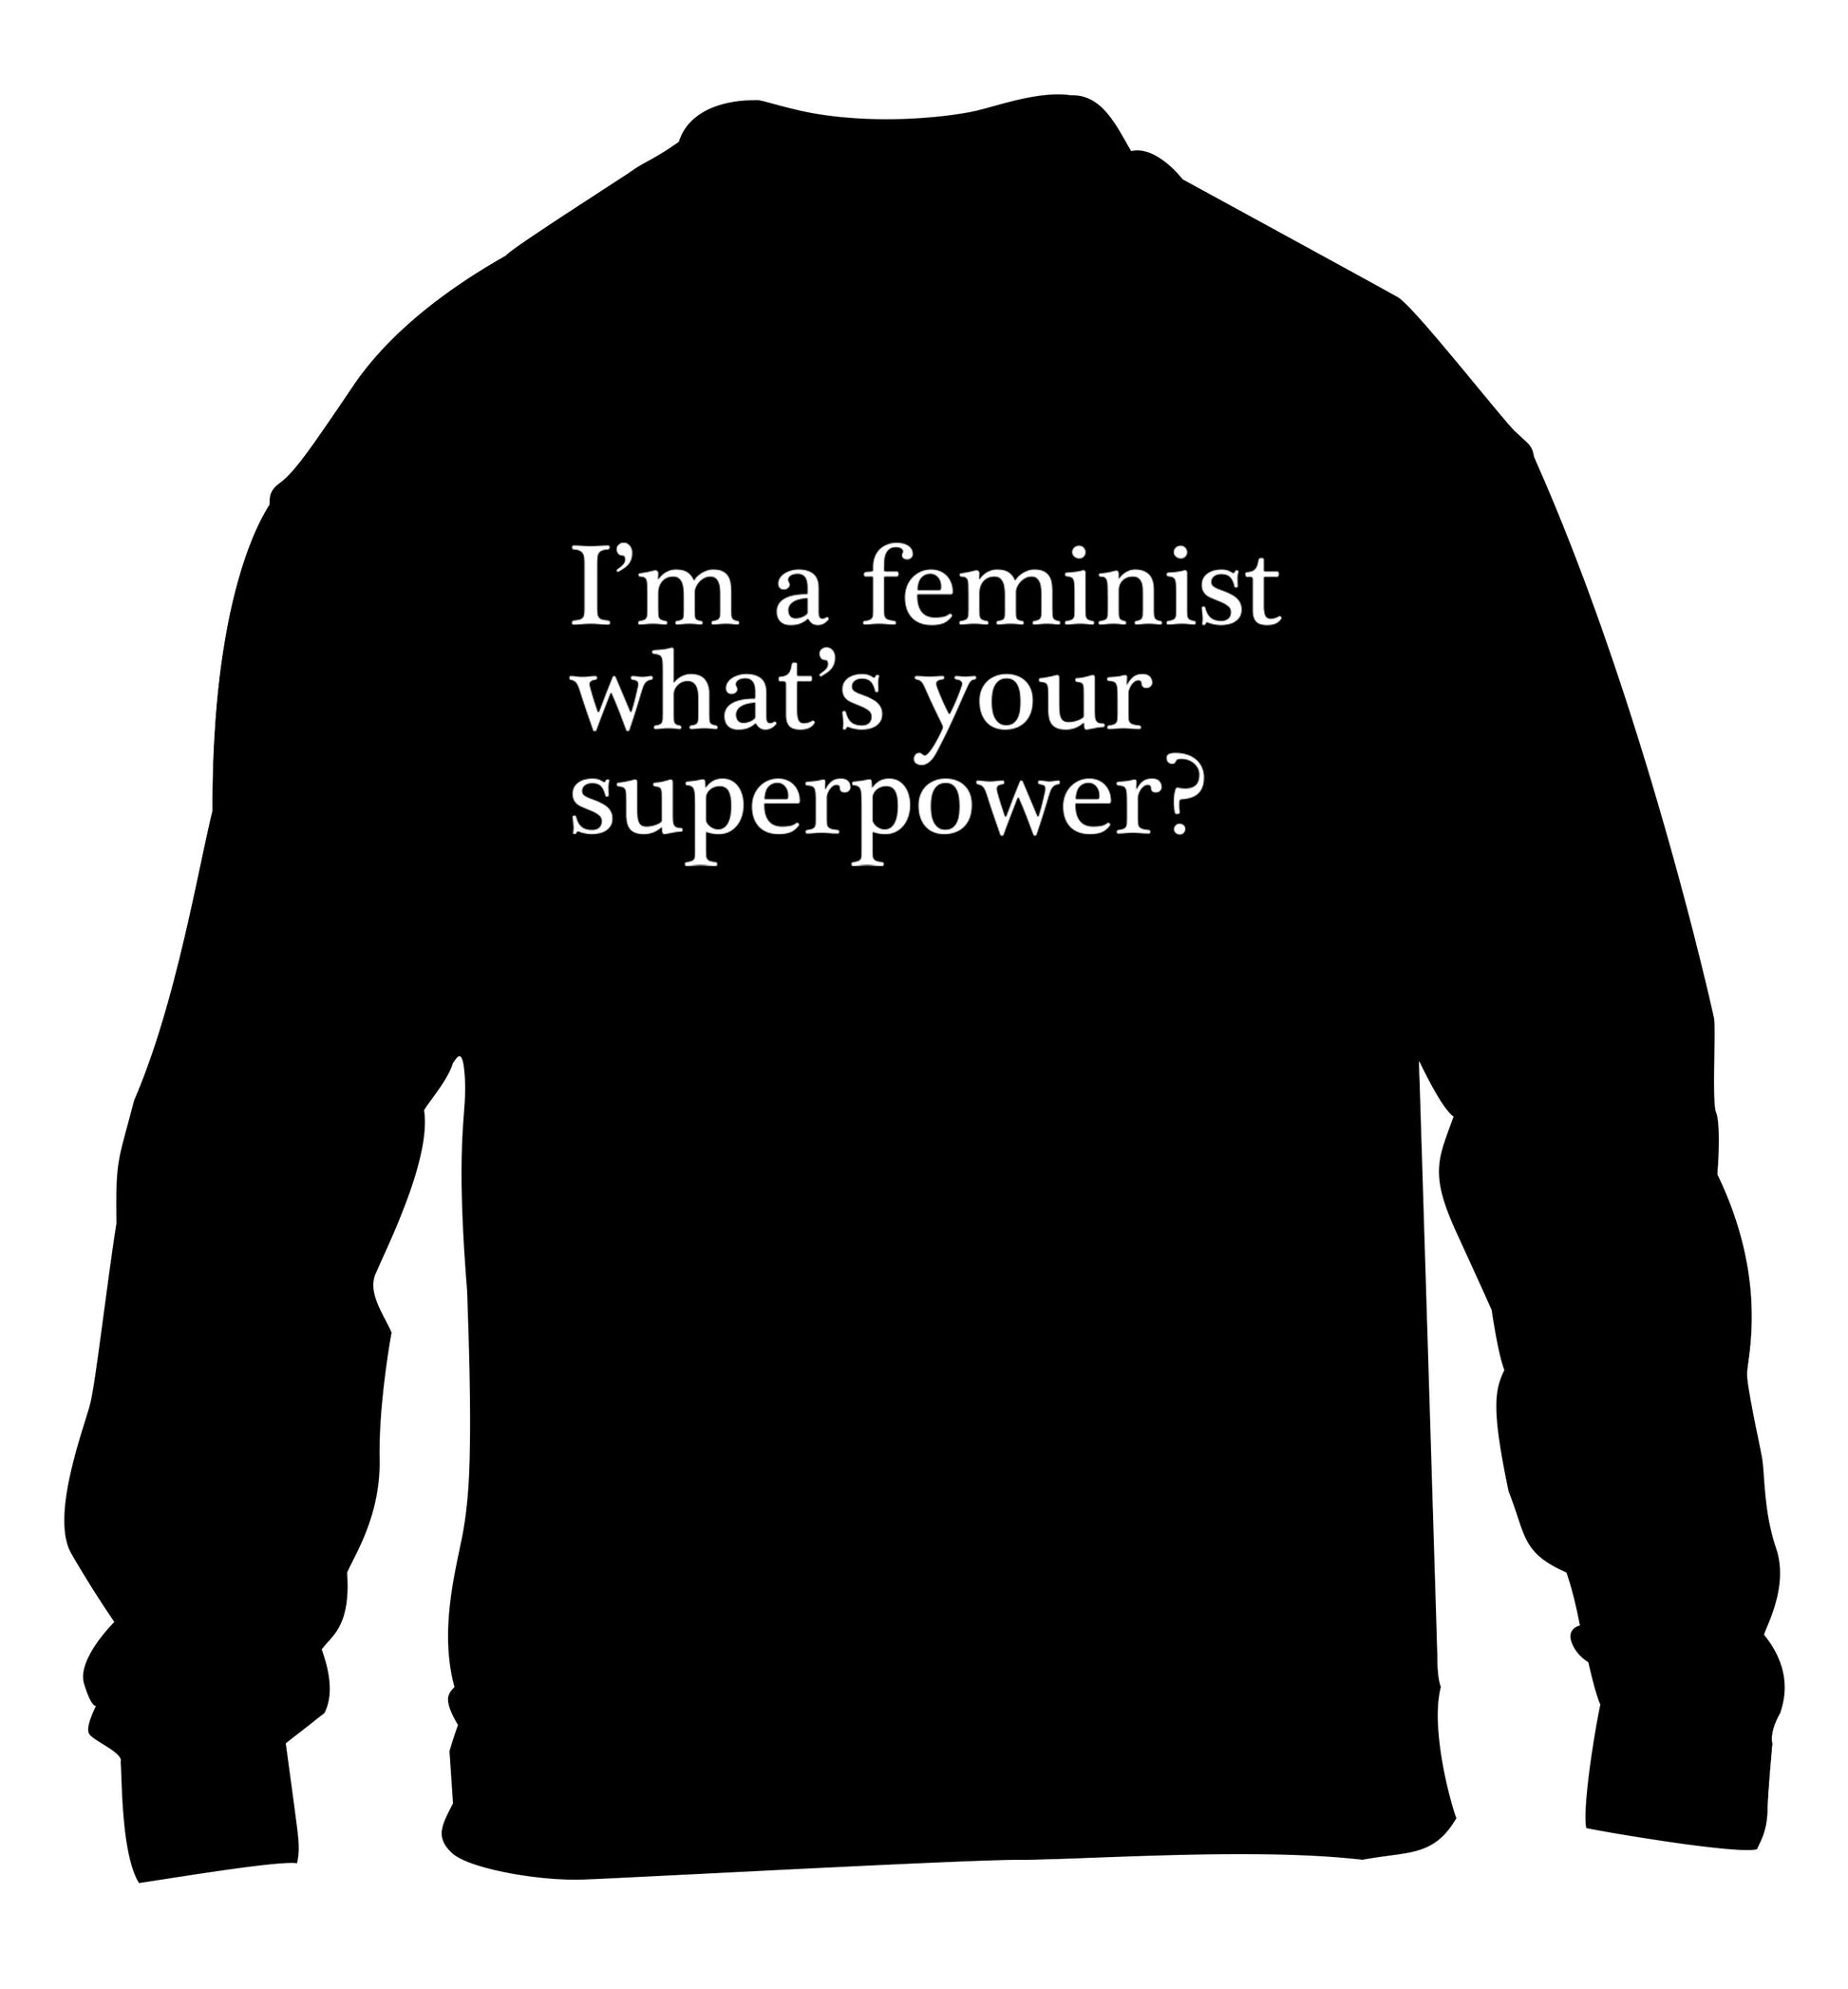 I'm a feminist what's your superpower? children's black sweater 12-14 Years